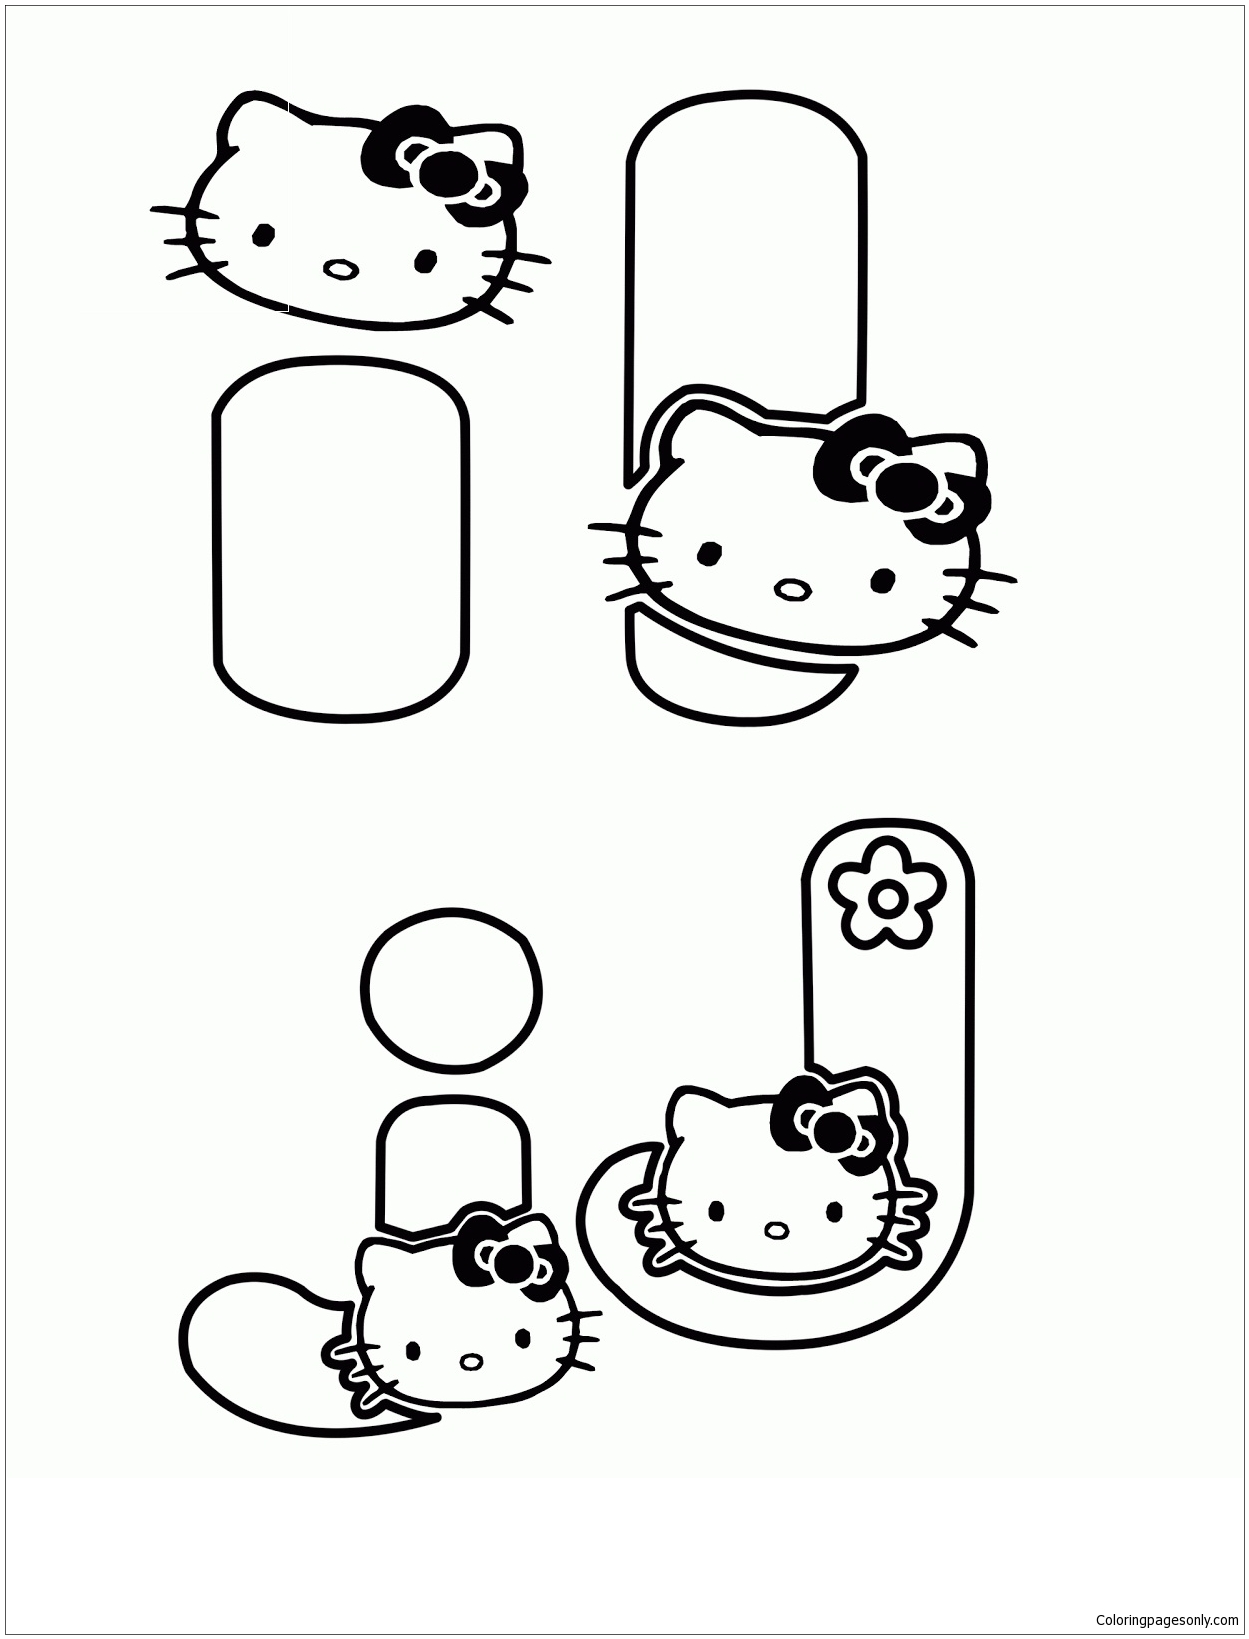 Learning letter I and J With Hello Kitty Coloring Pages